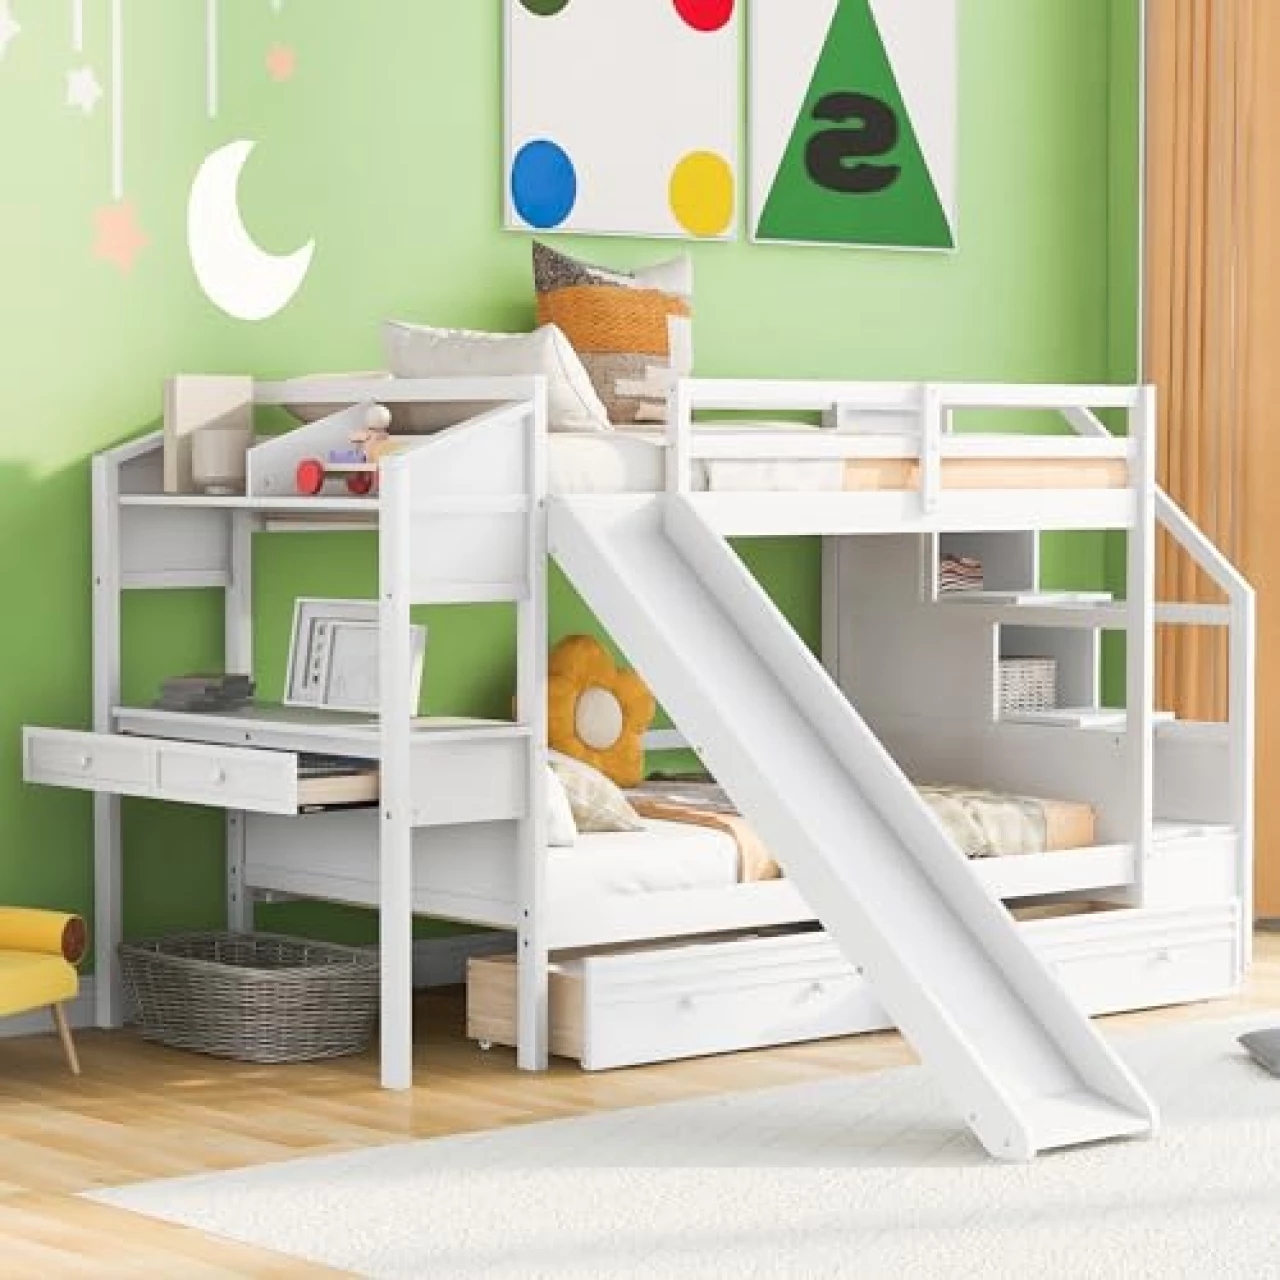 RORIGAT Twin Over Twin Bunk Bed with Desk for Kids, Bunk Bed with Slide and Drawers, Kids Bunk Bed with Storage Staircase and Shelves, Wood Bunk Bed Frame, White